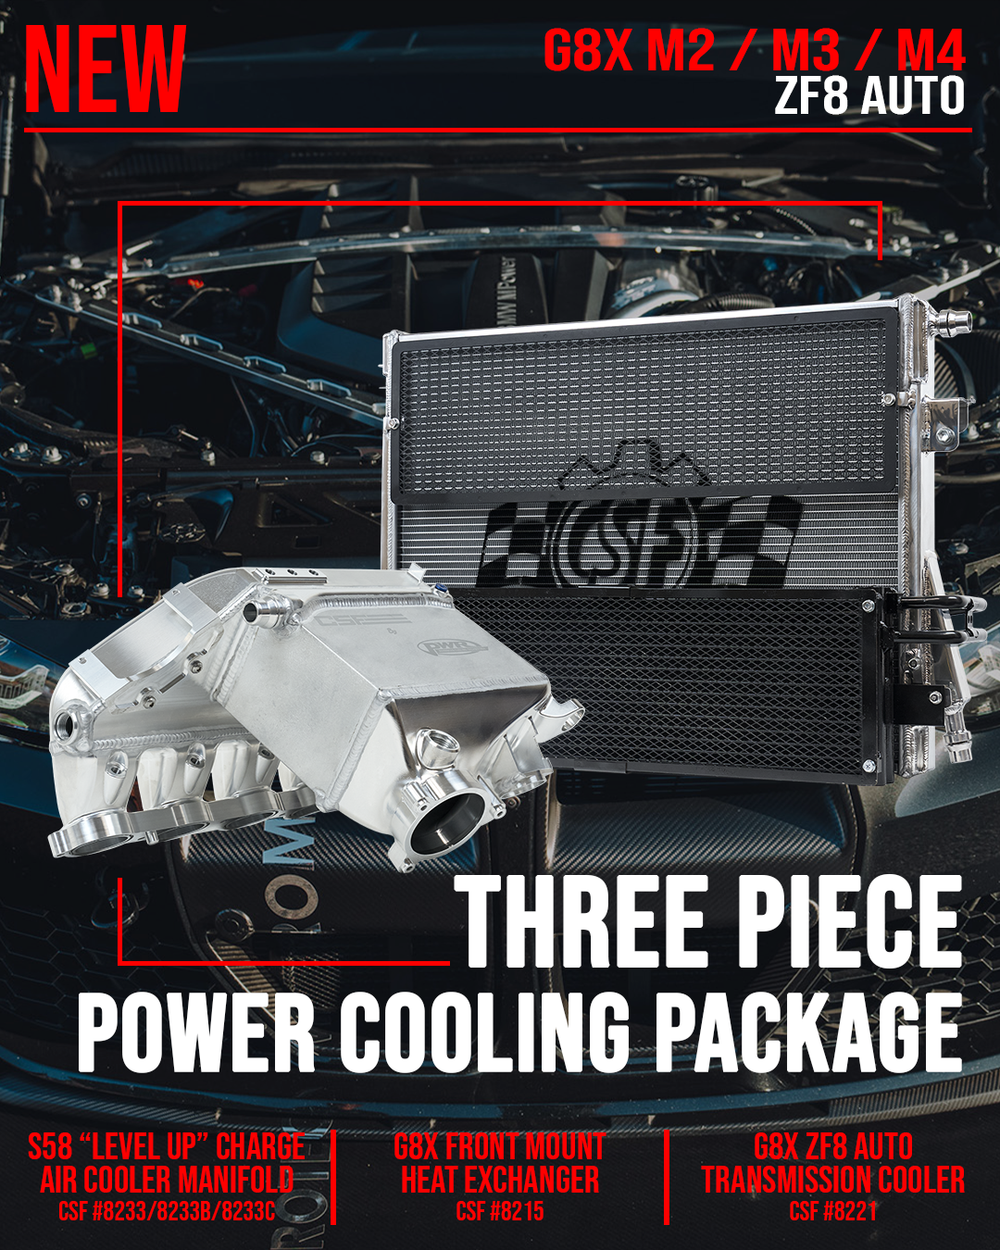 CSF G8X M2 / M3 / M4 3 Piece Power Cooling Package